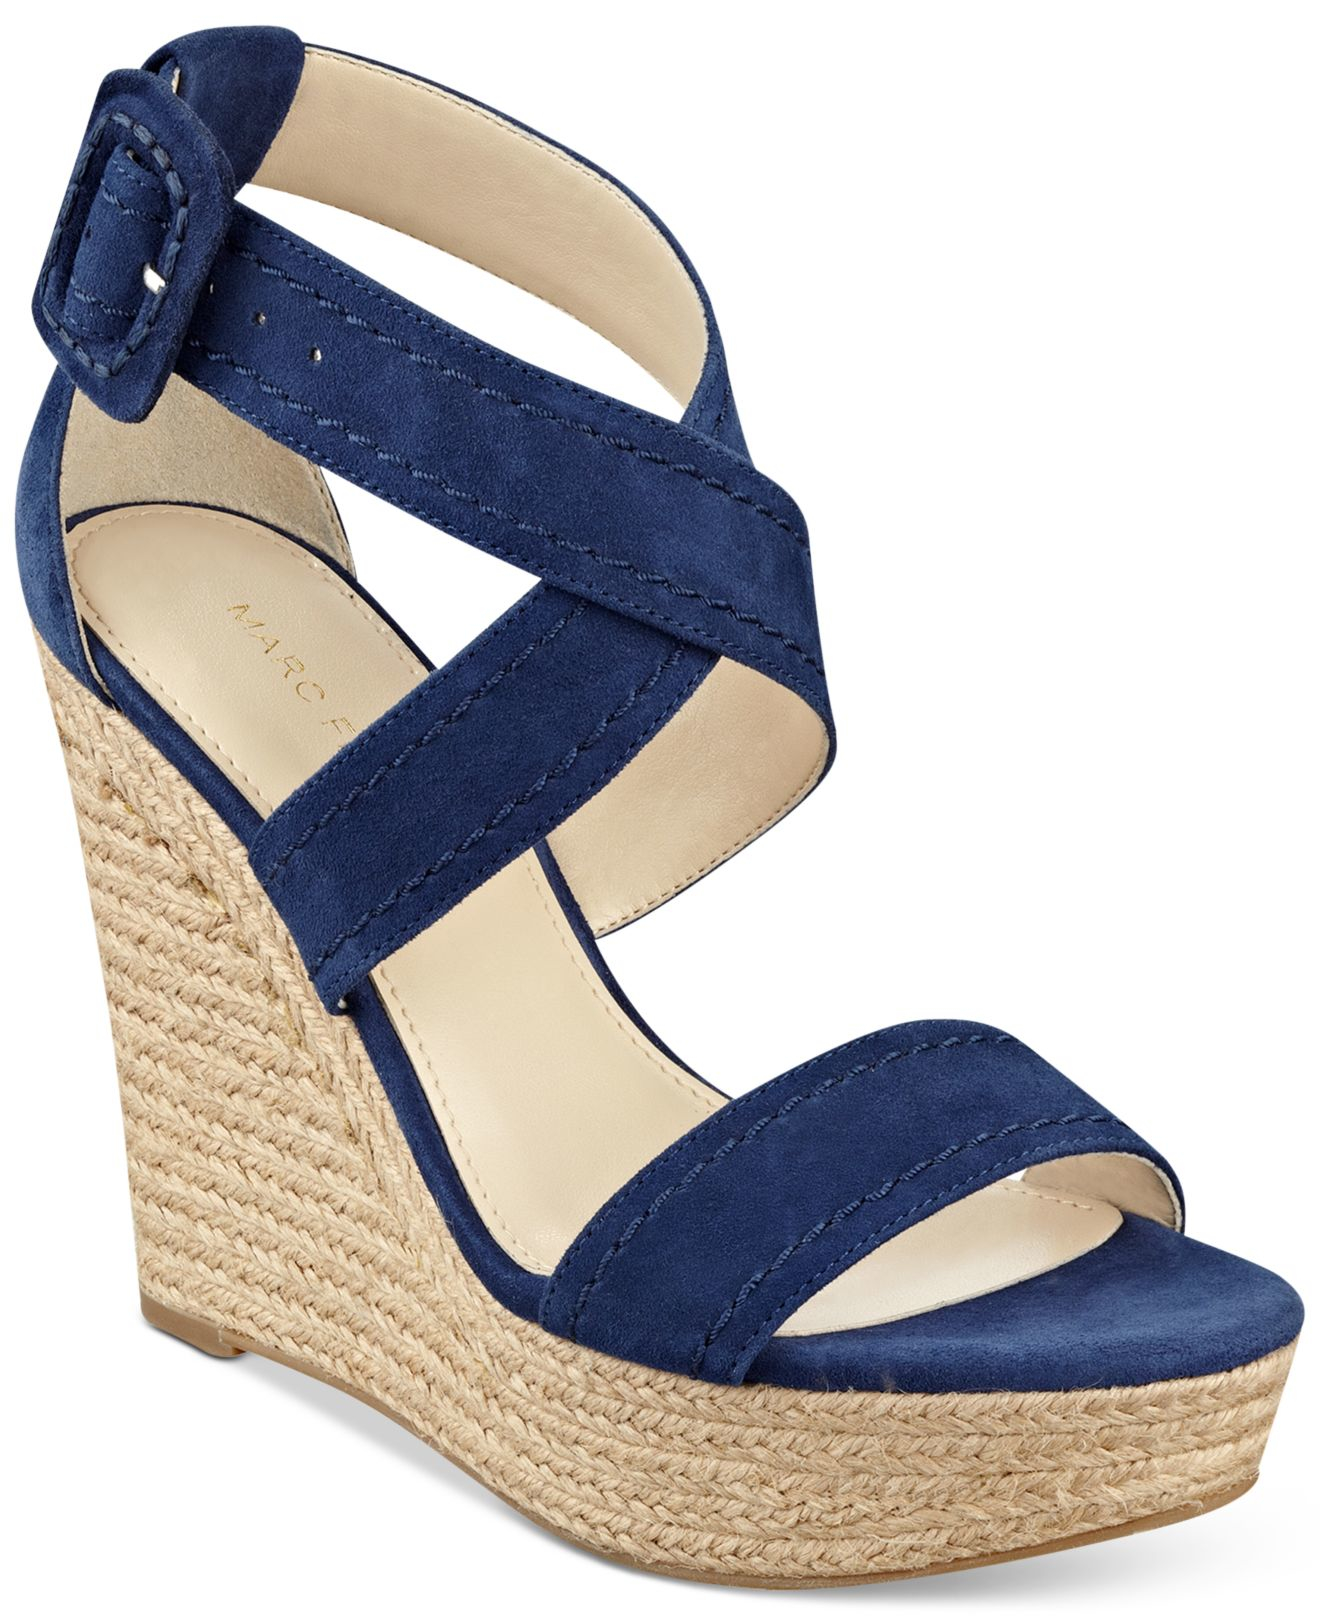 Marc fisher Haely Platform Wedge Sandals in Blue Lyst